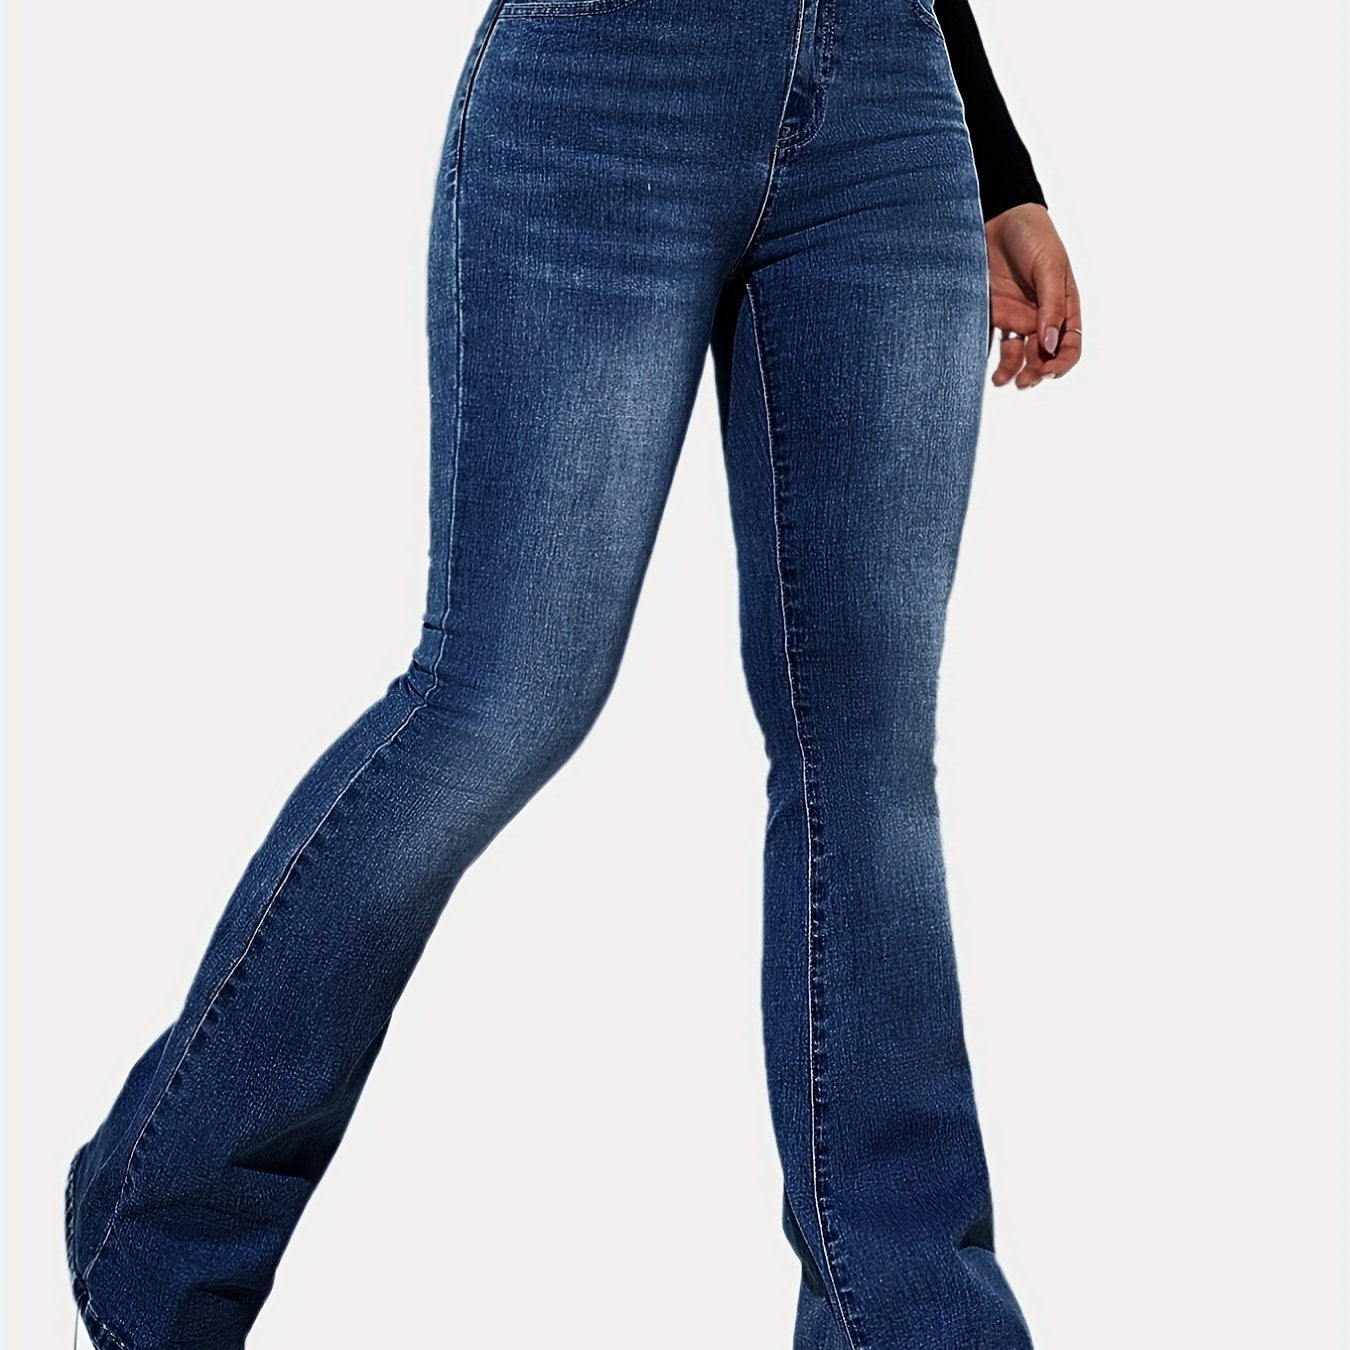 「binfenxie」Curvy Stretchy Bootcut Flare Denim Jeans, High Waist Stretch Fitted Skinny Flare Jeans, Women's Denim Jeans & Clothing